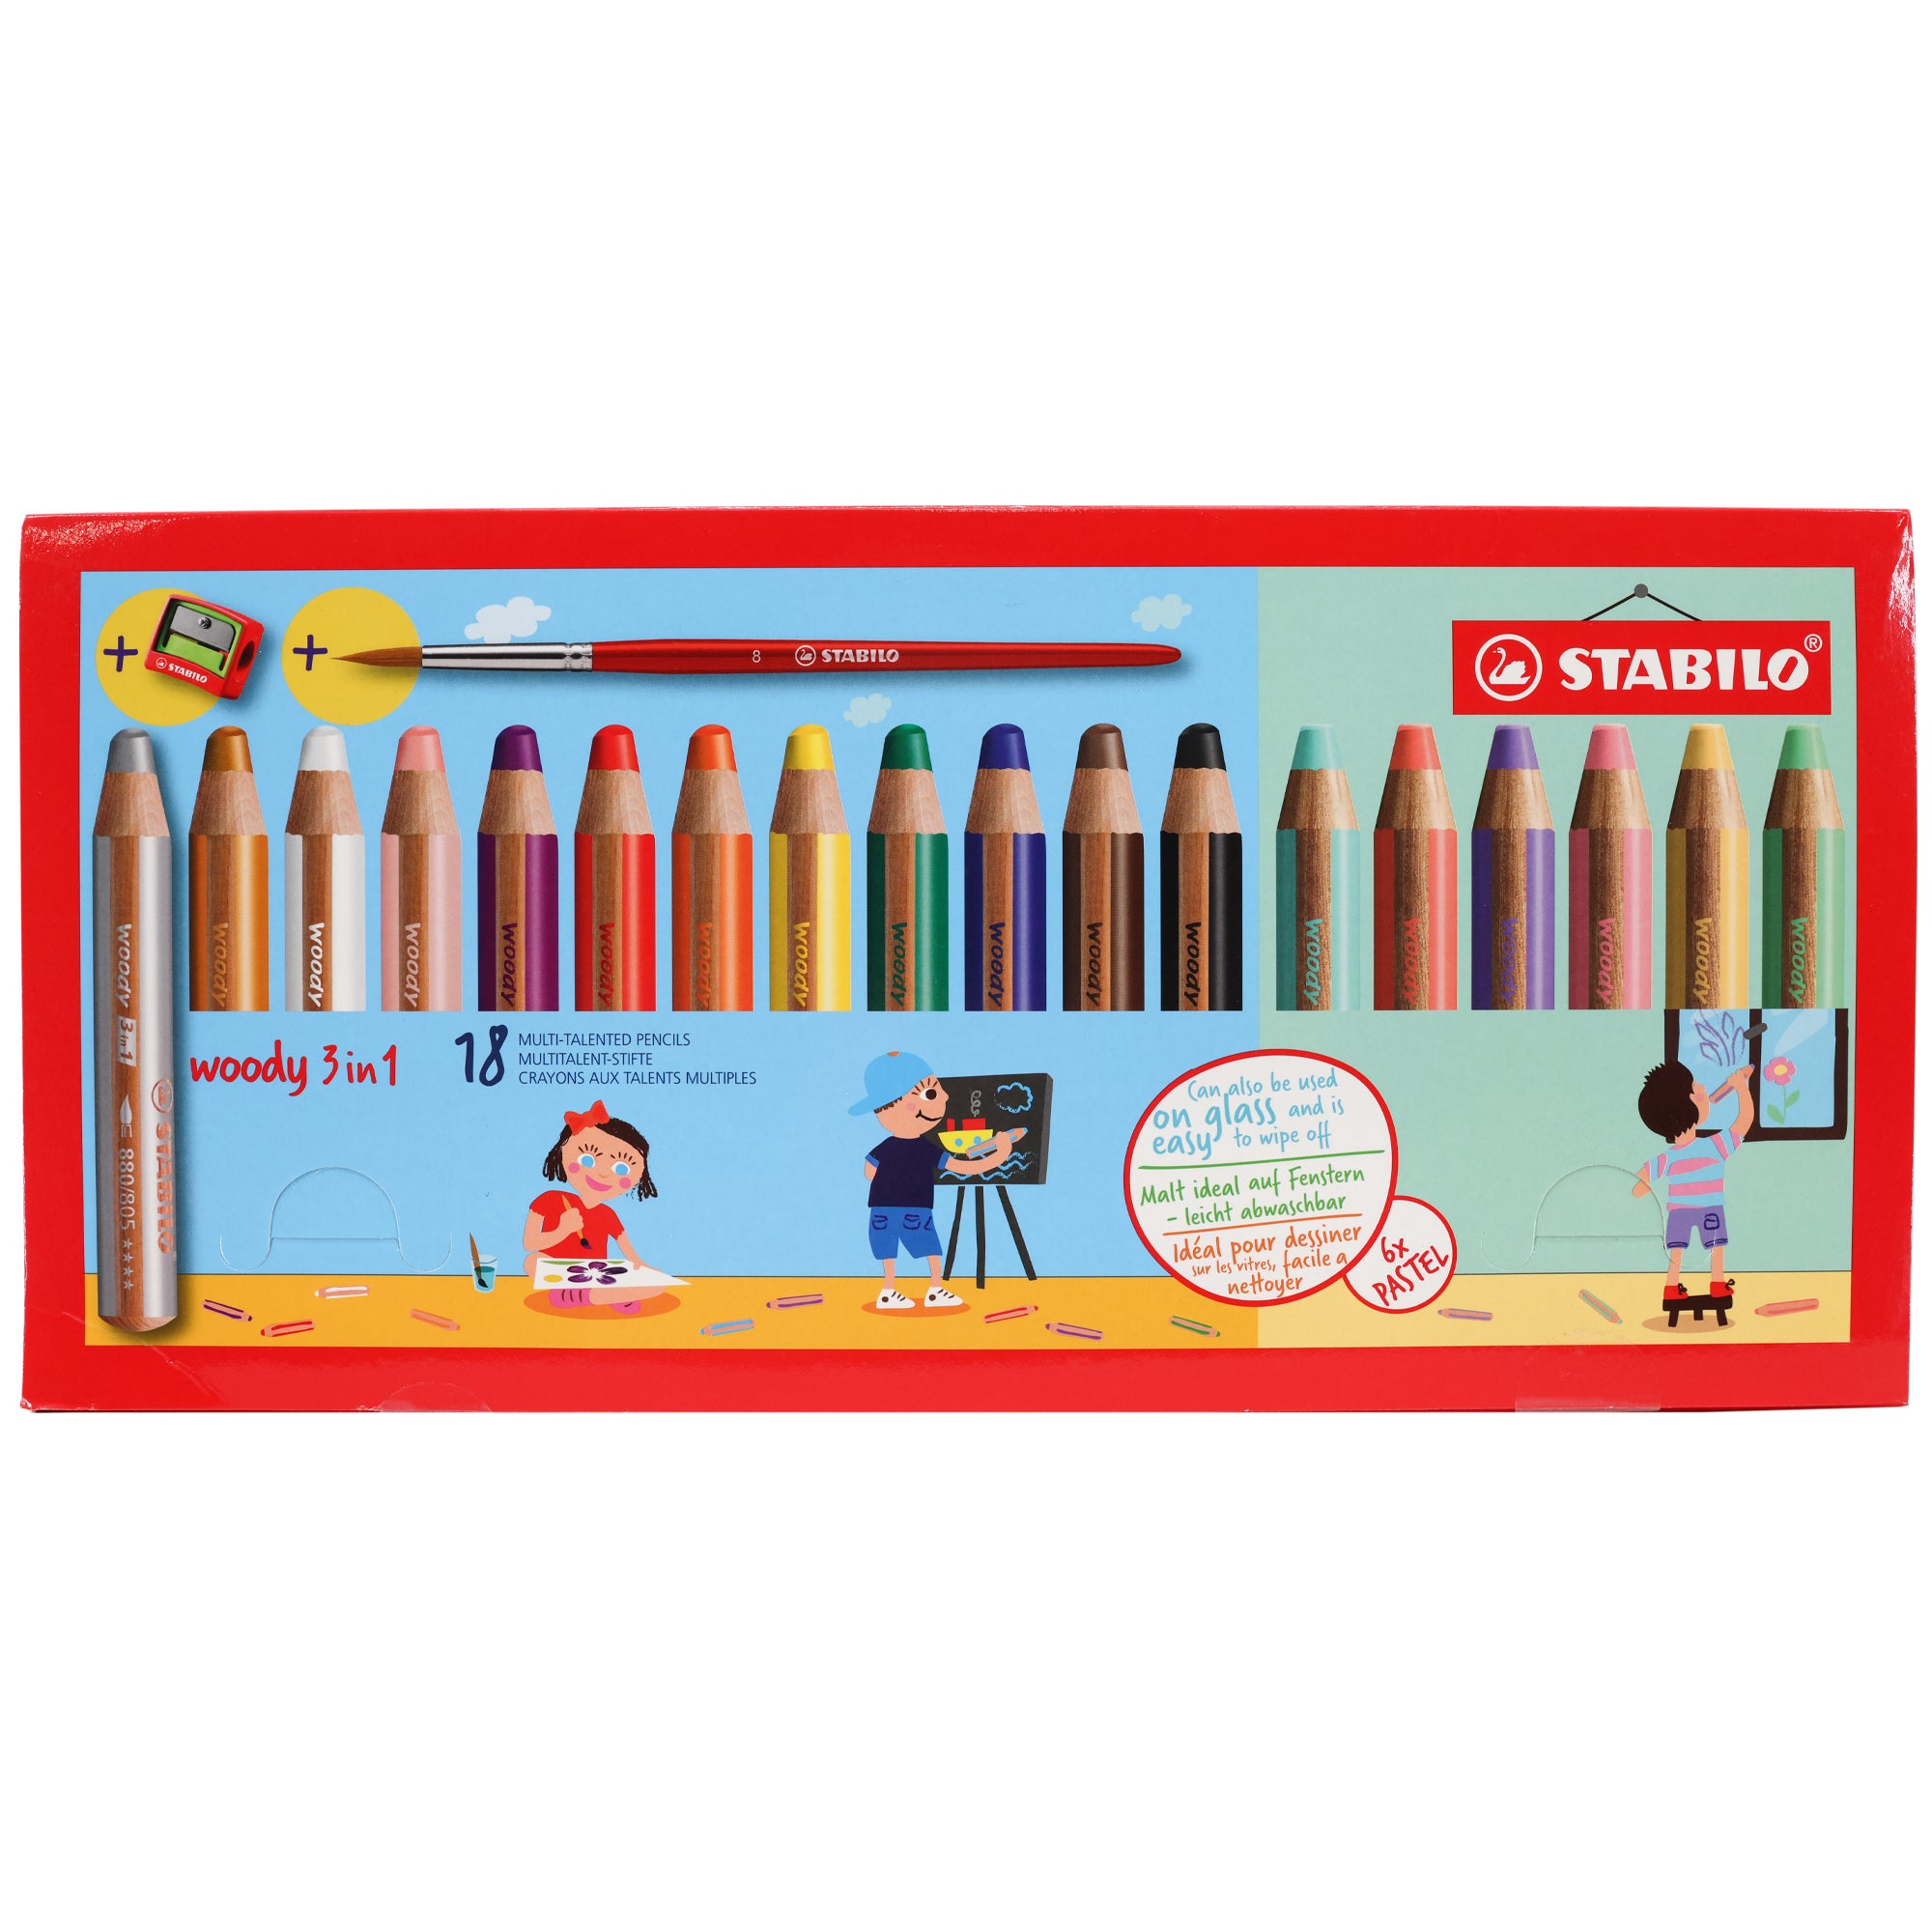 Stabilo Woody set box cover. 18 thick pencils in a variety of colors shown with sharpener and paint brush. Illustrations of a girl drawing a flower, a boy painting a boat, and a boy drawing plants on a window.